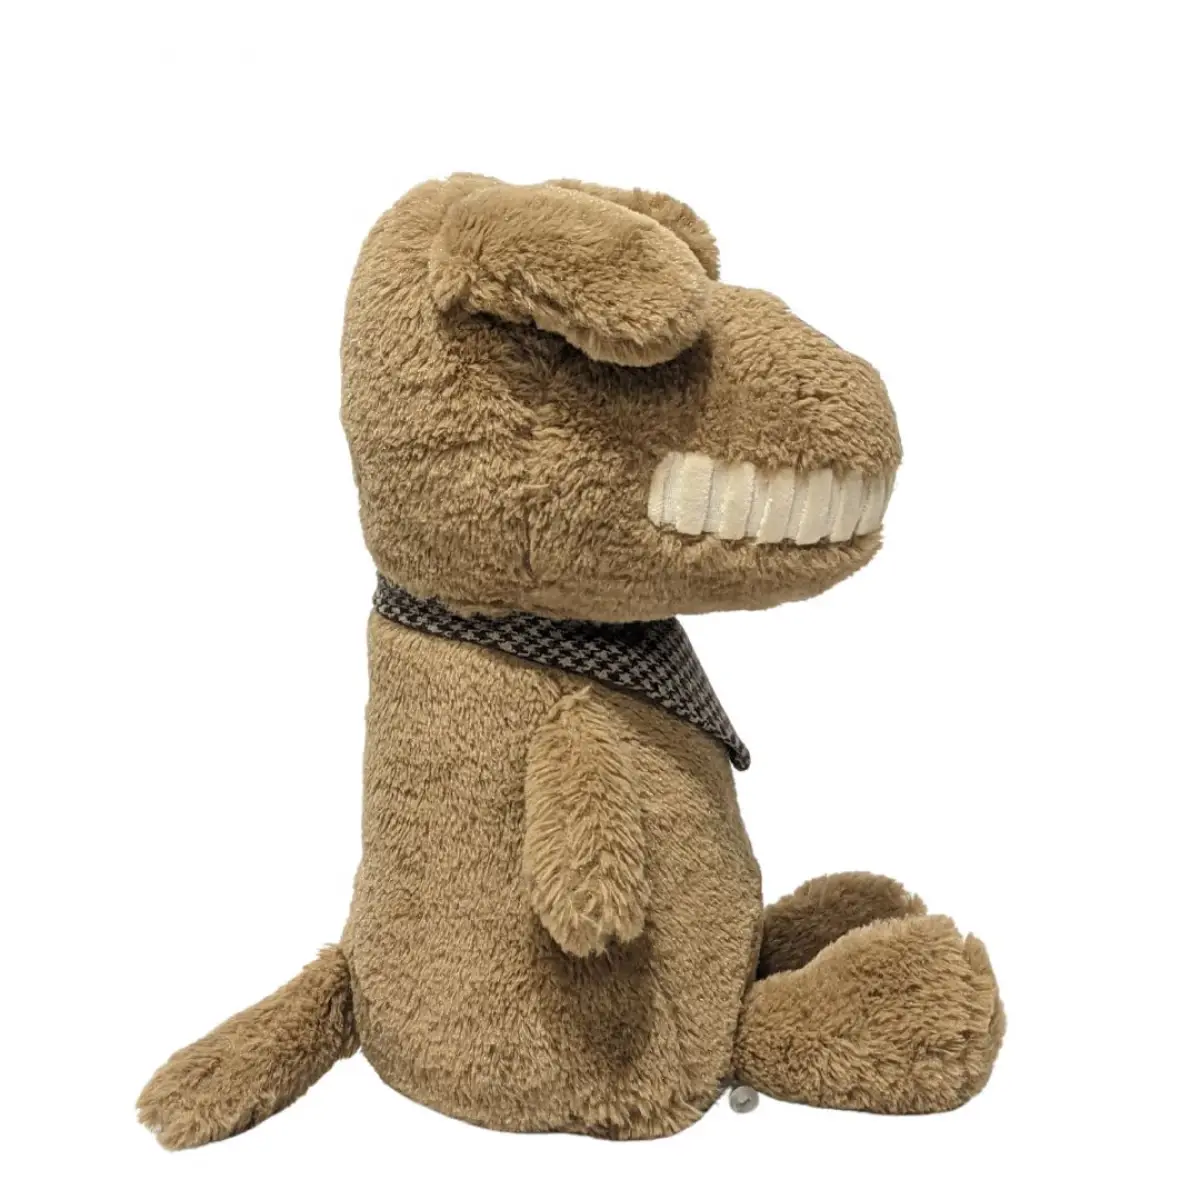 Cheeky Dog Huggable Cuddly Stuffed Toy By Fuzzbuzz, Soft Toys for Kids, Cute Plushies Brown, For Kids Of Age 2 Years & Above